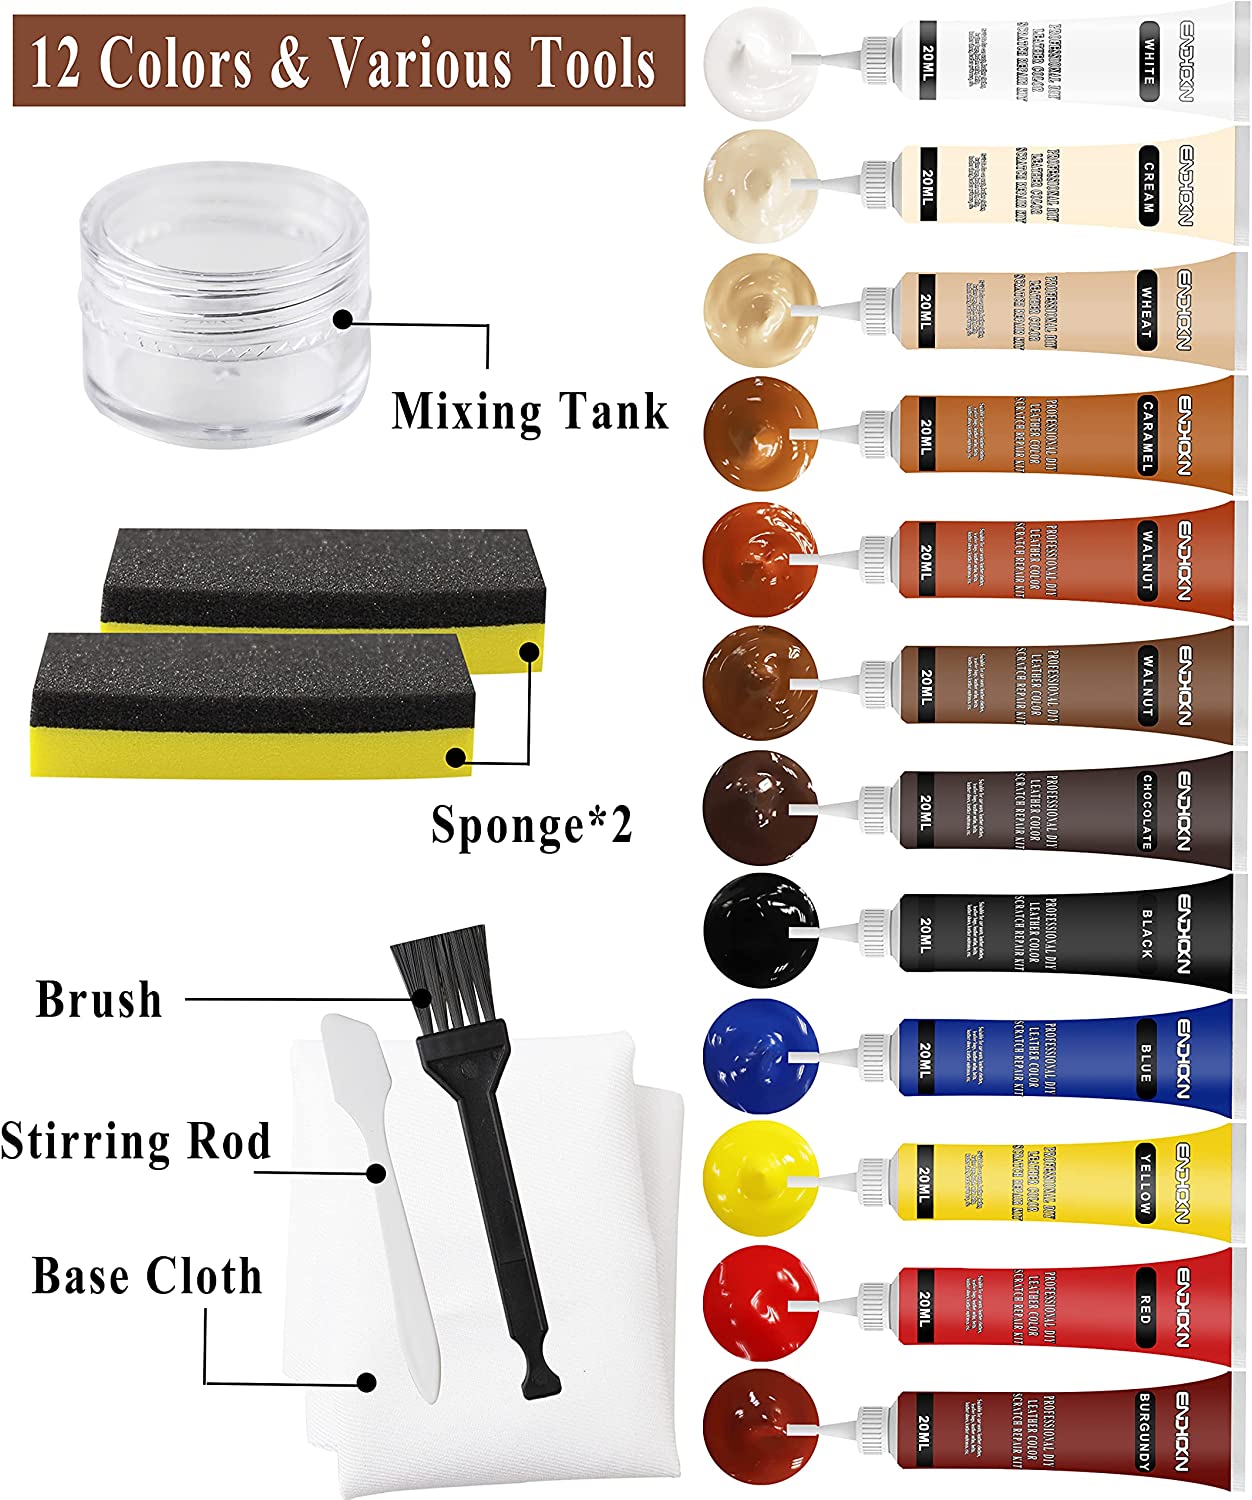  Endhokn Black Leather Repair Kit Vinyl Repair Kit-Furniture  Sofa, Car Seat, Leather Clothing, Leather Bag, Belt, Suitcase, Leather  Gloves and Other Cracks and Damage Repair Kit : Automotive